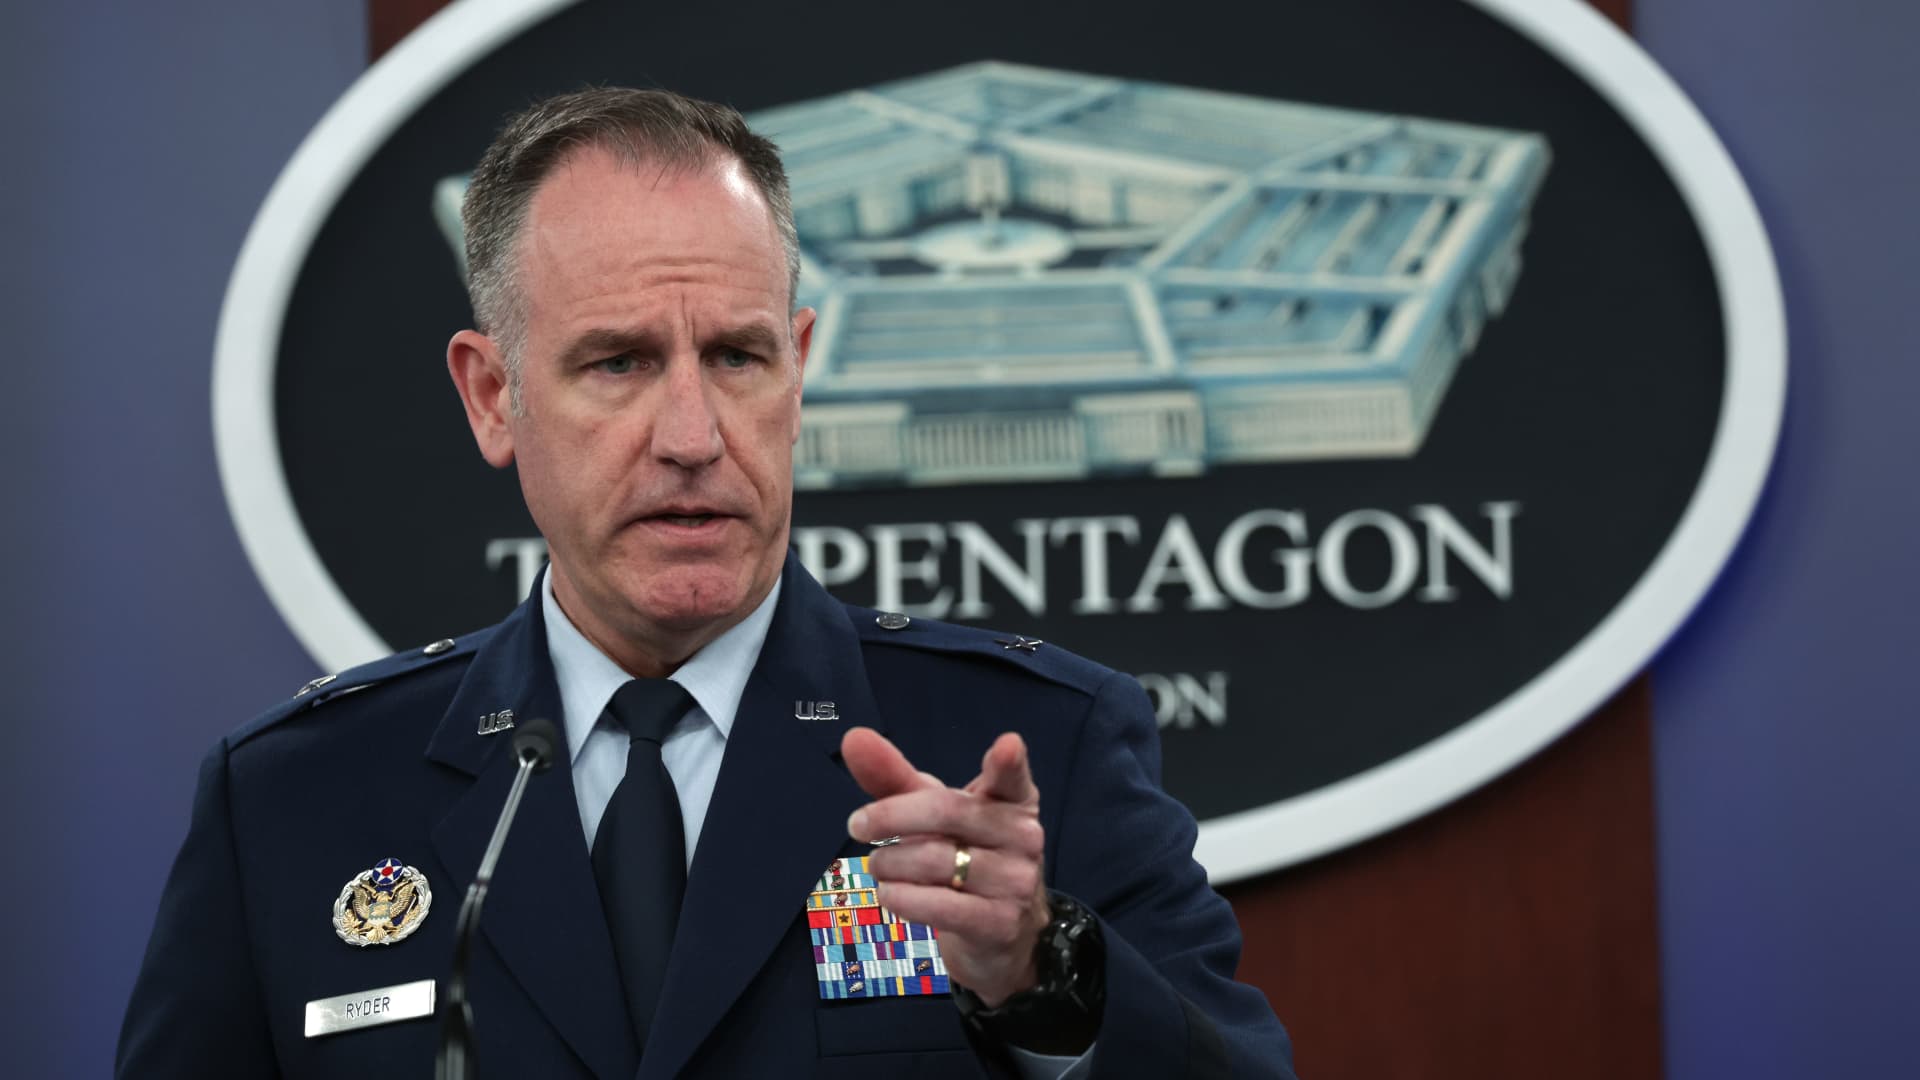 Pentagon Press Secretary Air Force Brig. Gen. Pat Ryder speaks during a news briefing at the Pentagon September 6, 2022 in Arlington, Virginia. Brig. Gen. Ryder held a news briefing to answer questions from members of the press.